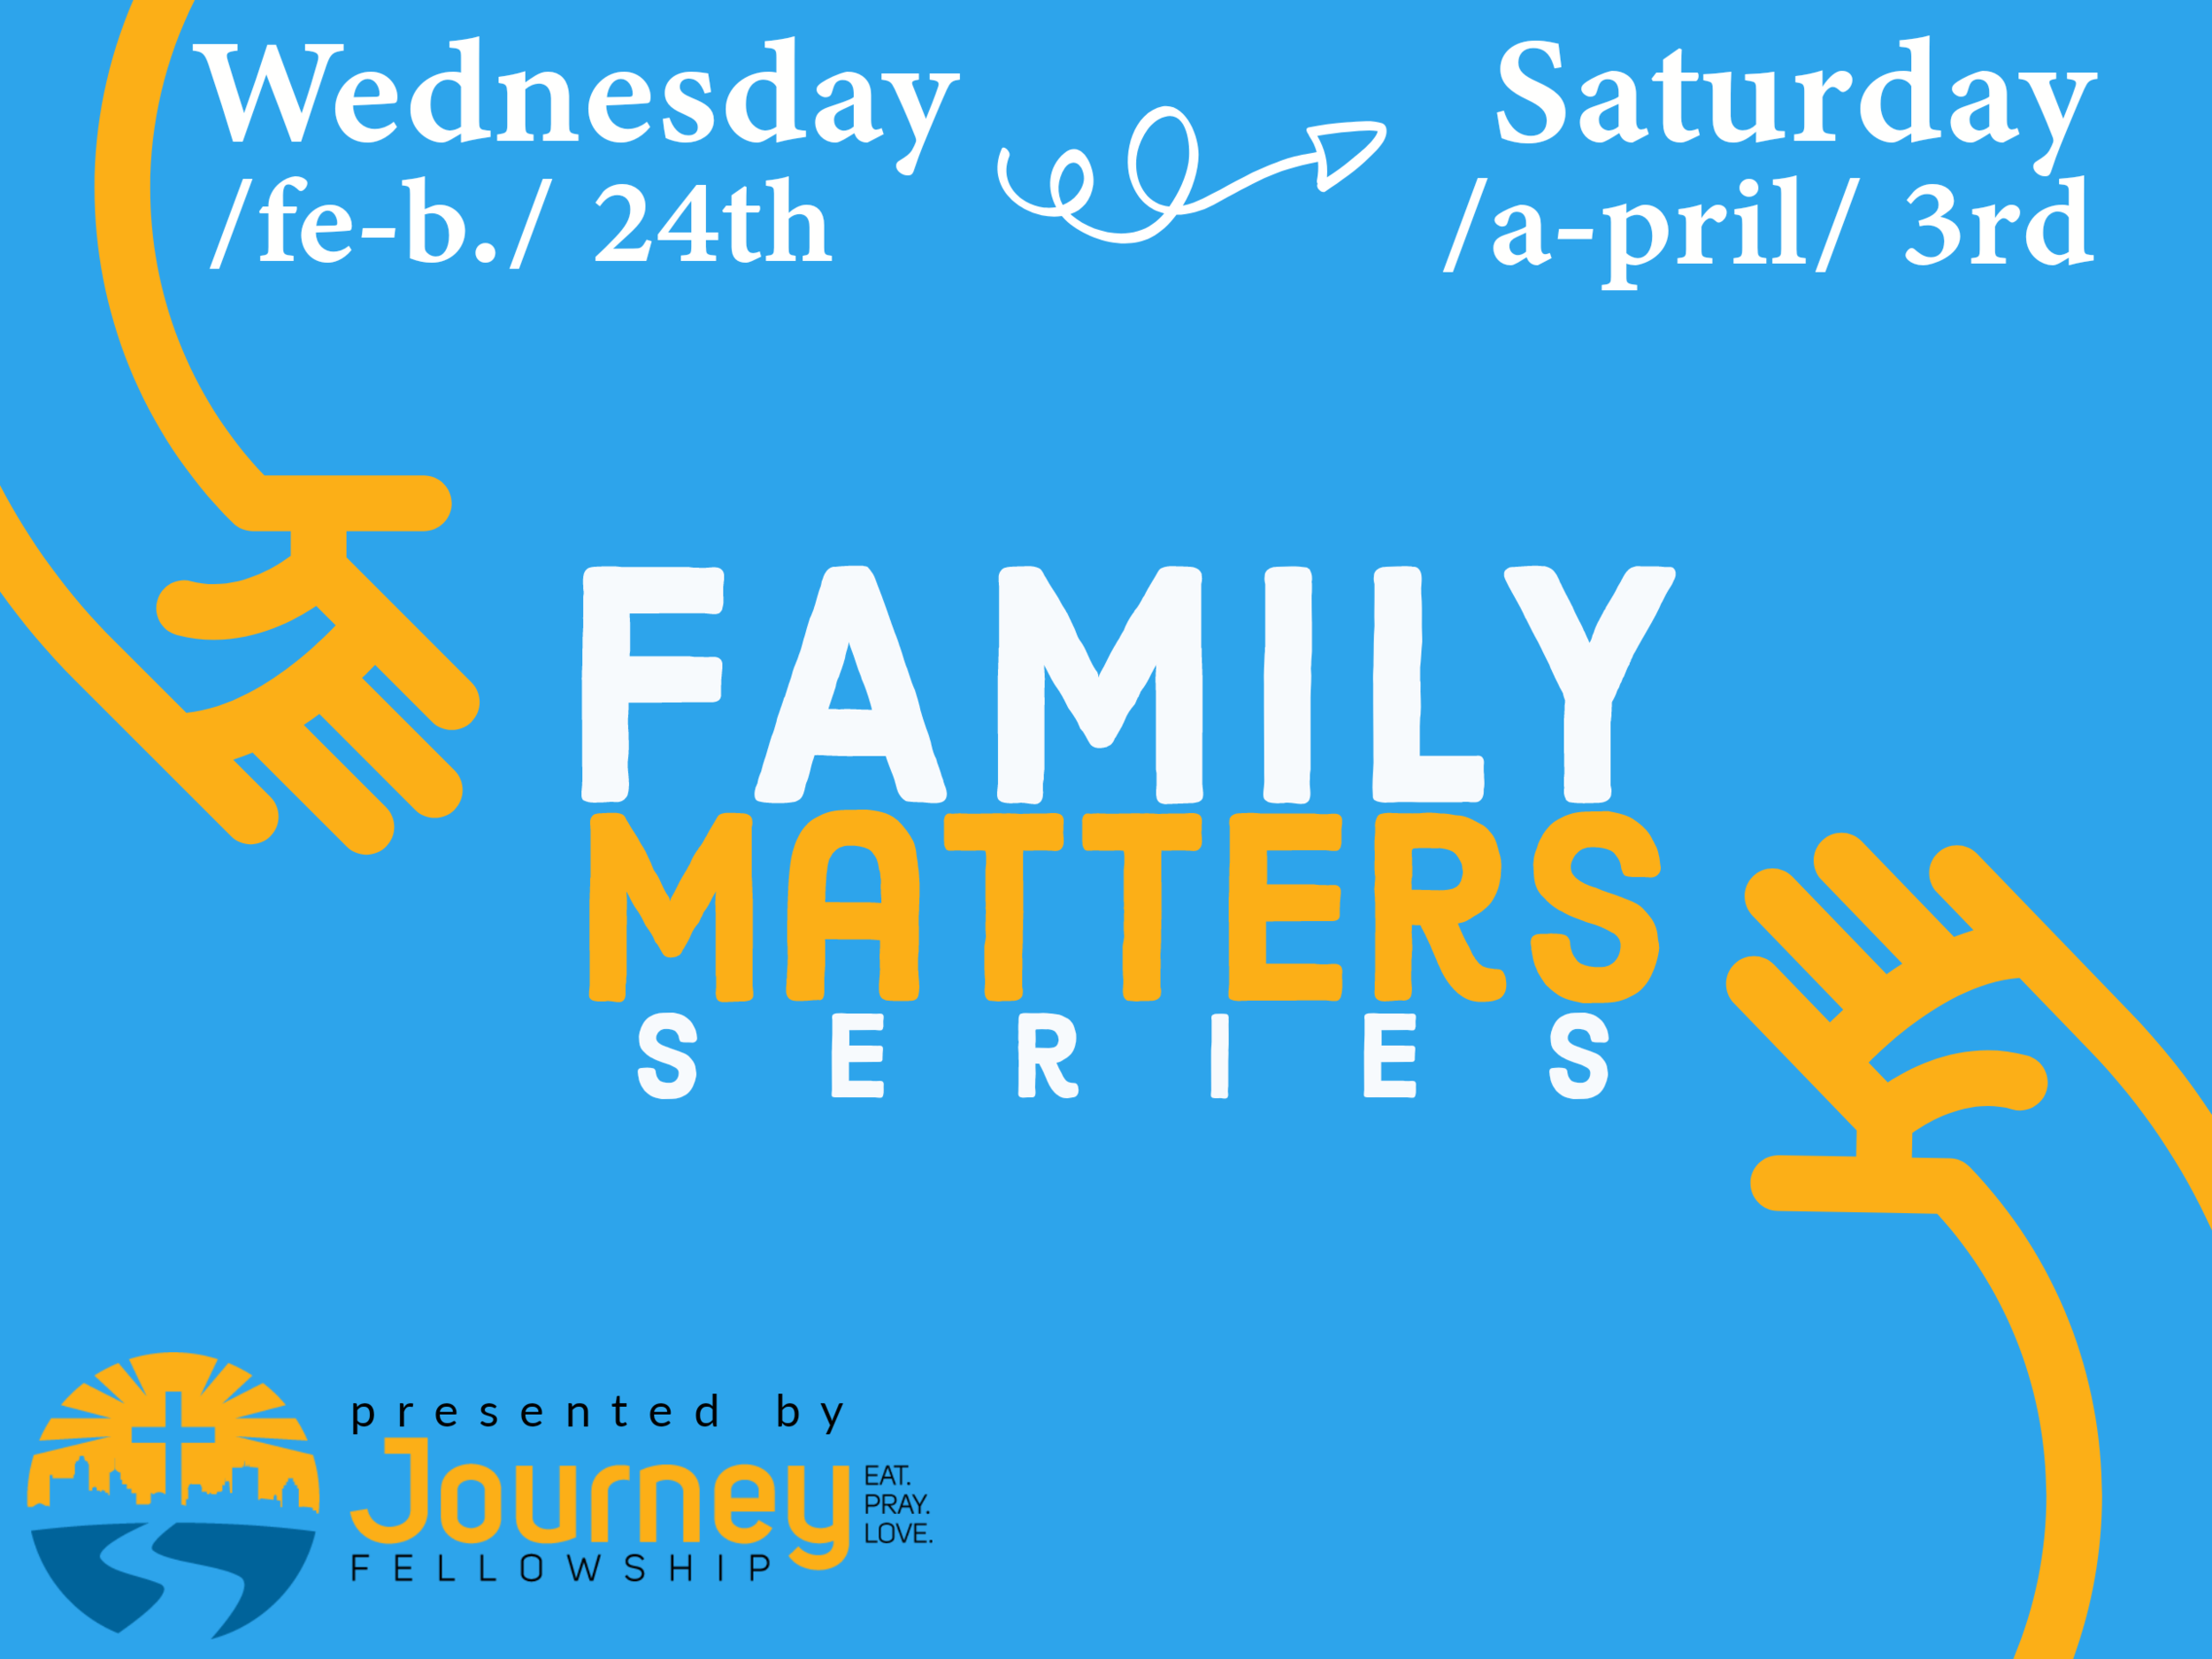 Family Metters Flyer full dates 4 x 3.png